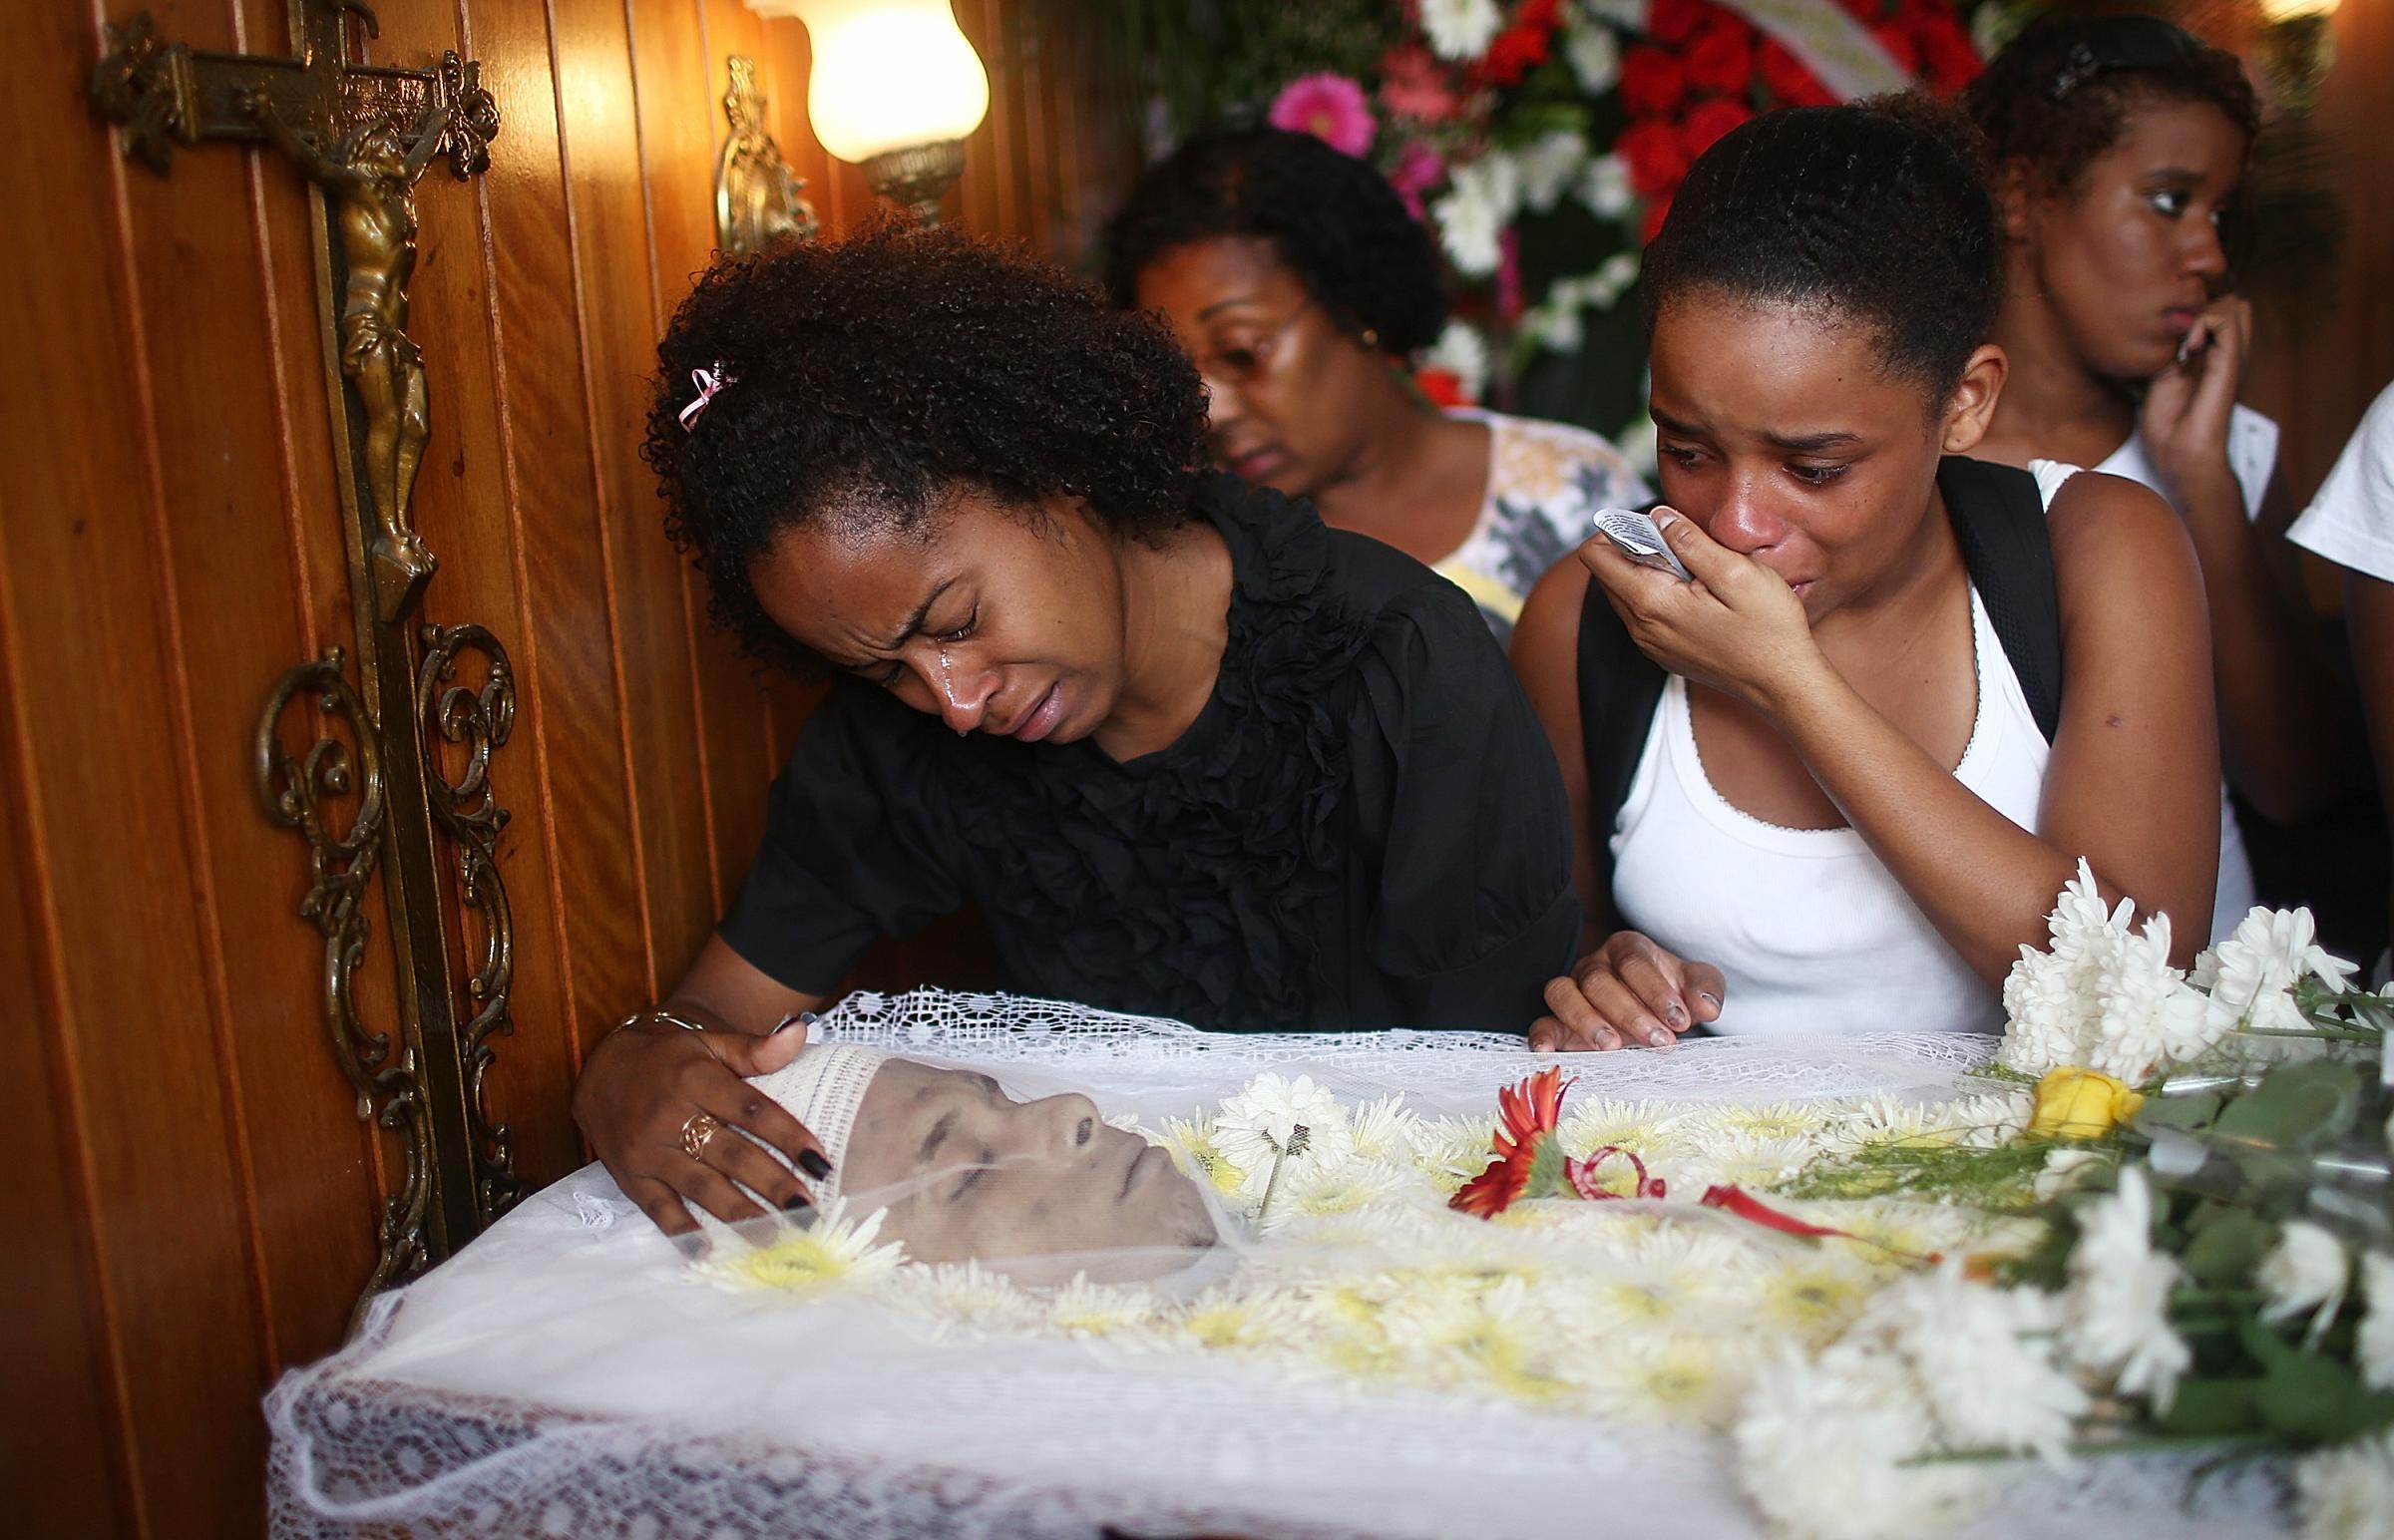 Funeral Held For Rio Resident Killed In Favela Violence